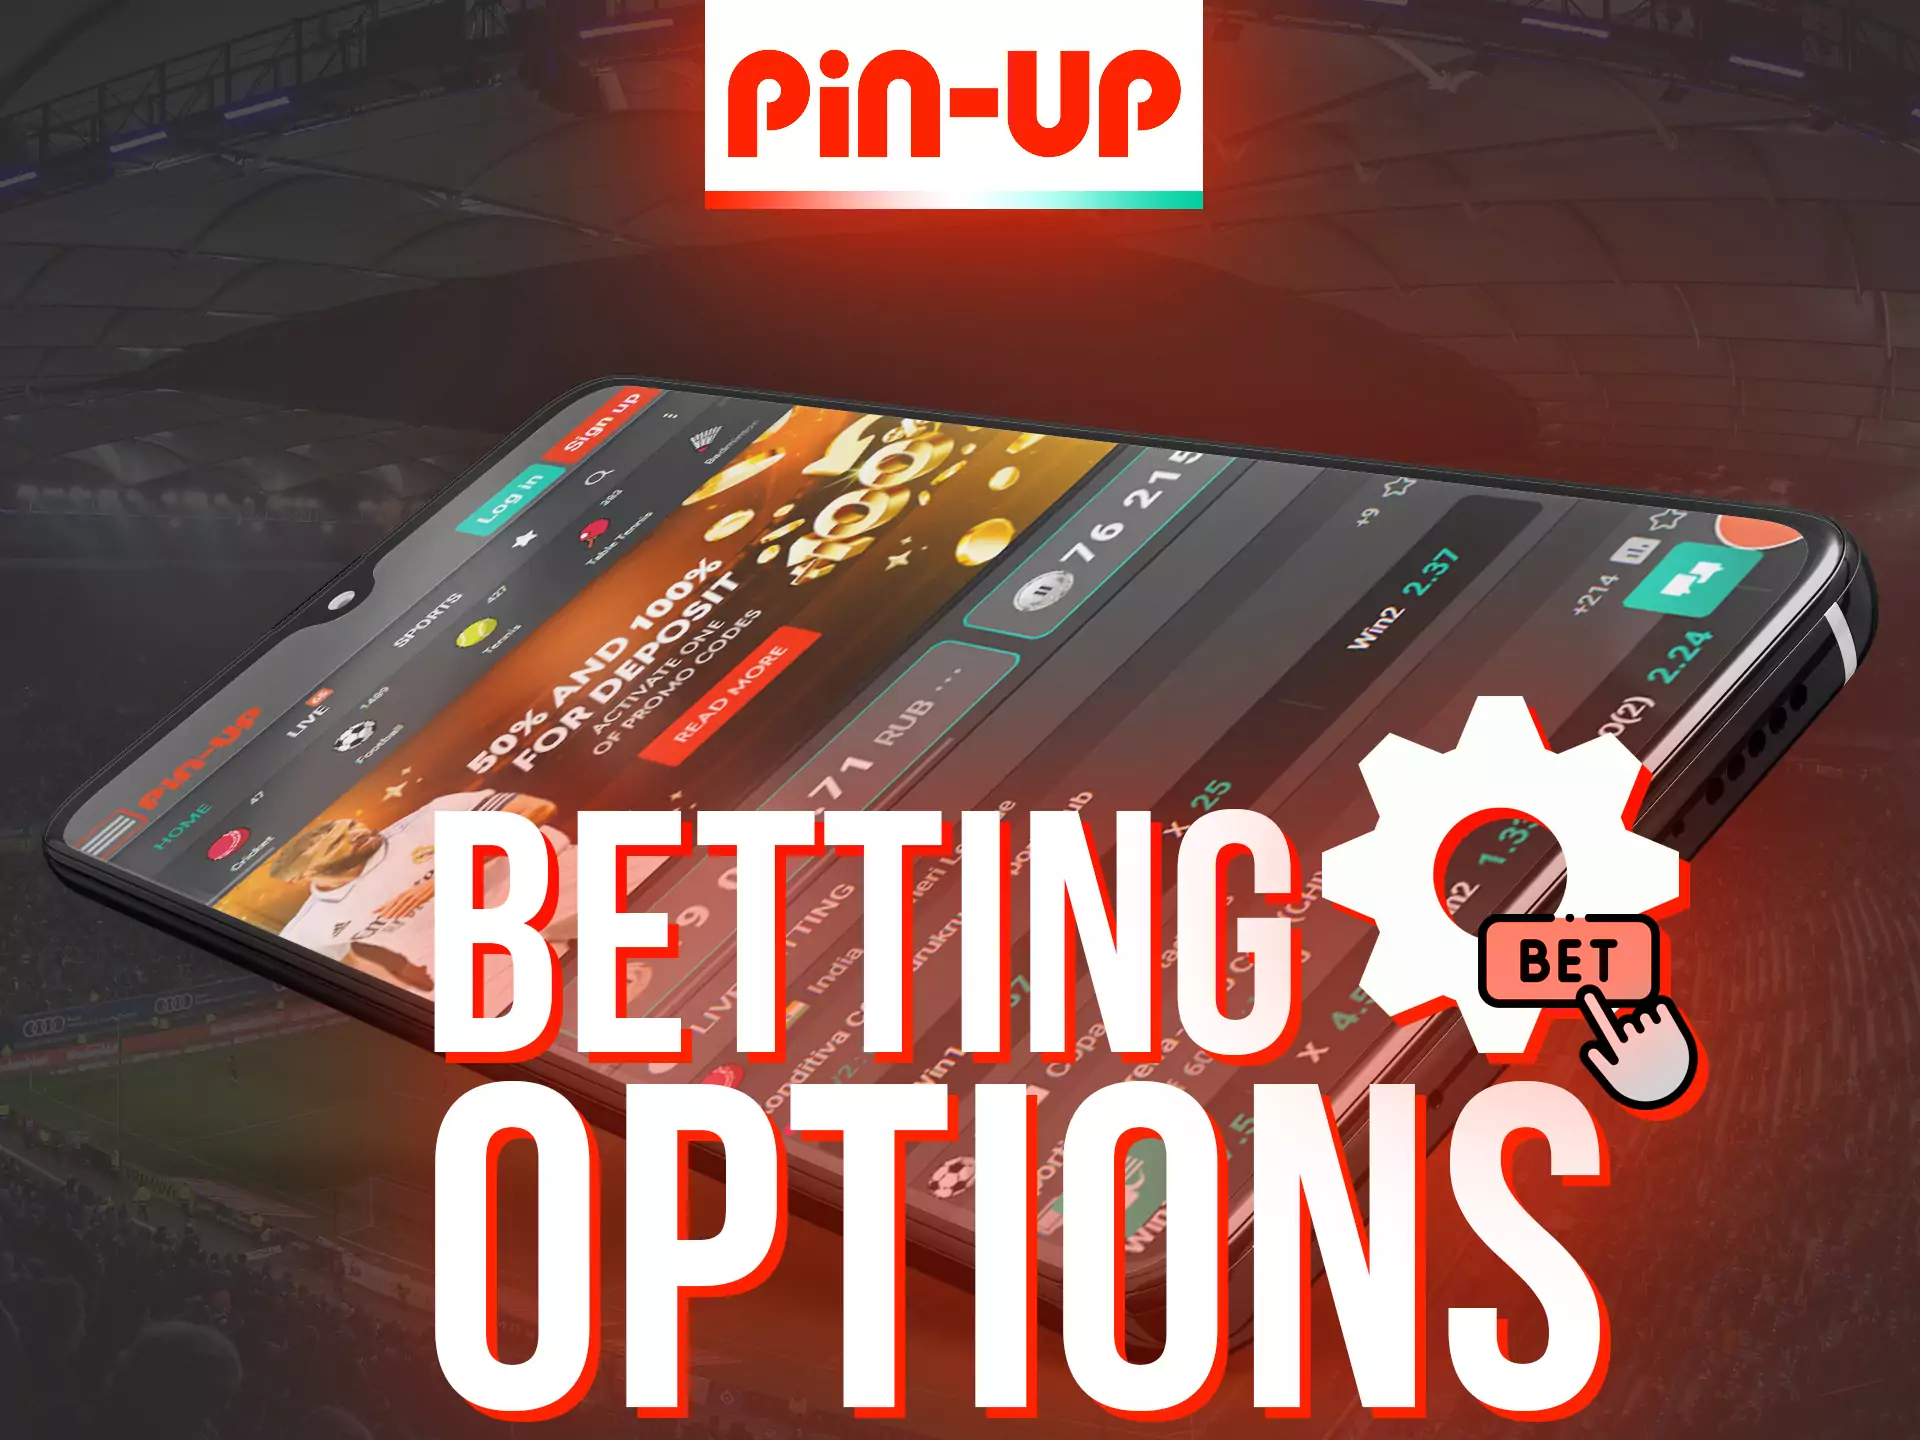 In the Pin-Up app, try different options for sports betting.